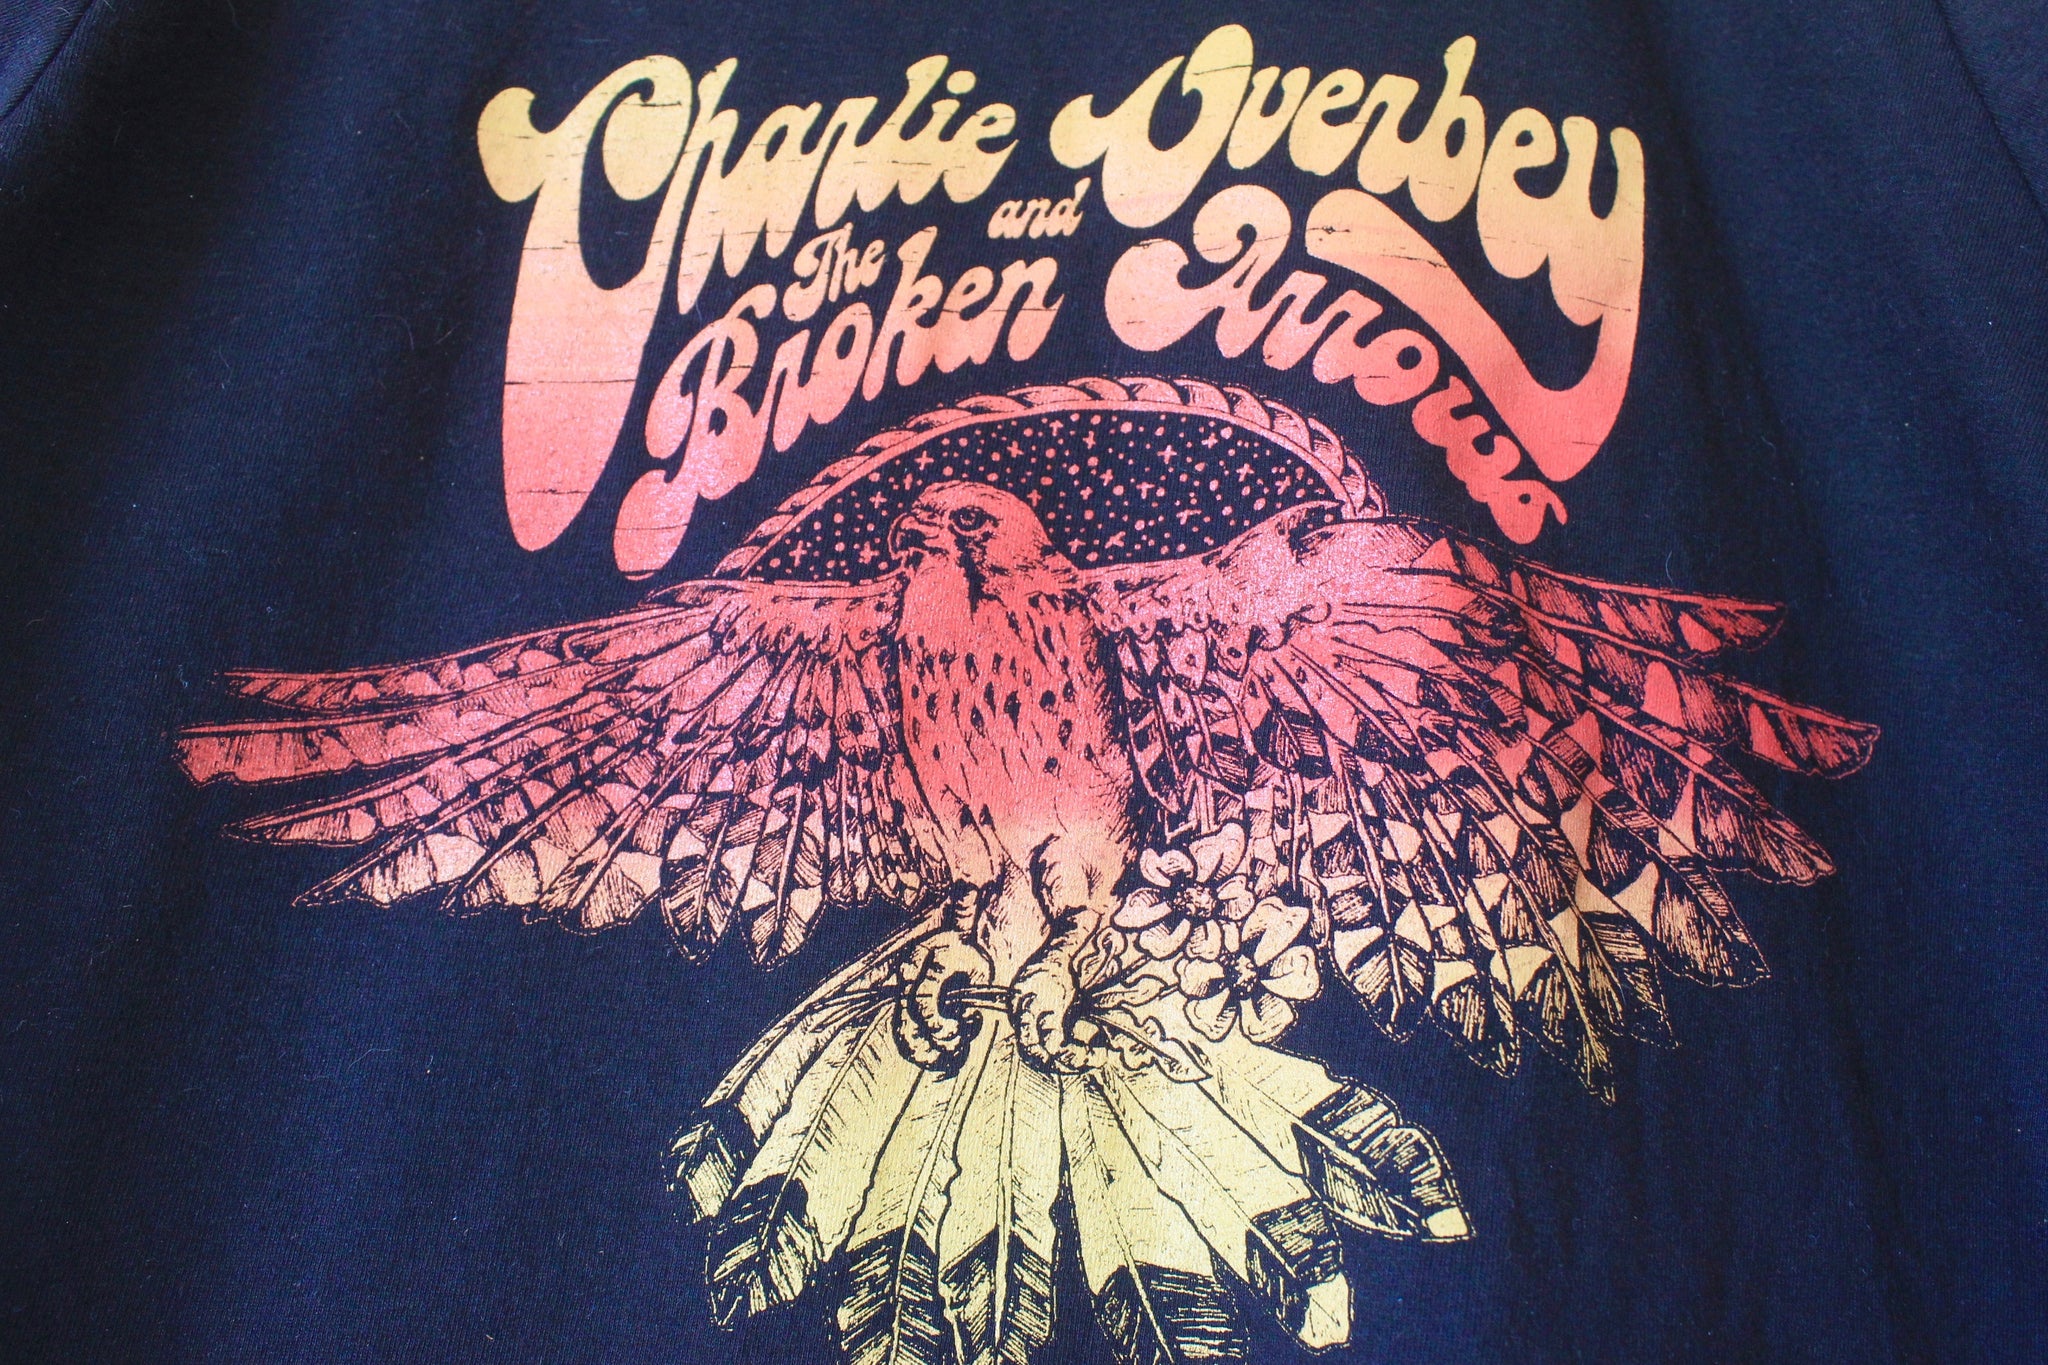 Charlie Overbey & The Broken Arrows "Ombre Sunset' Shirt